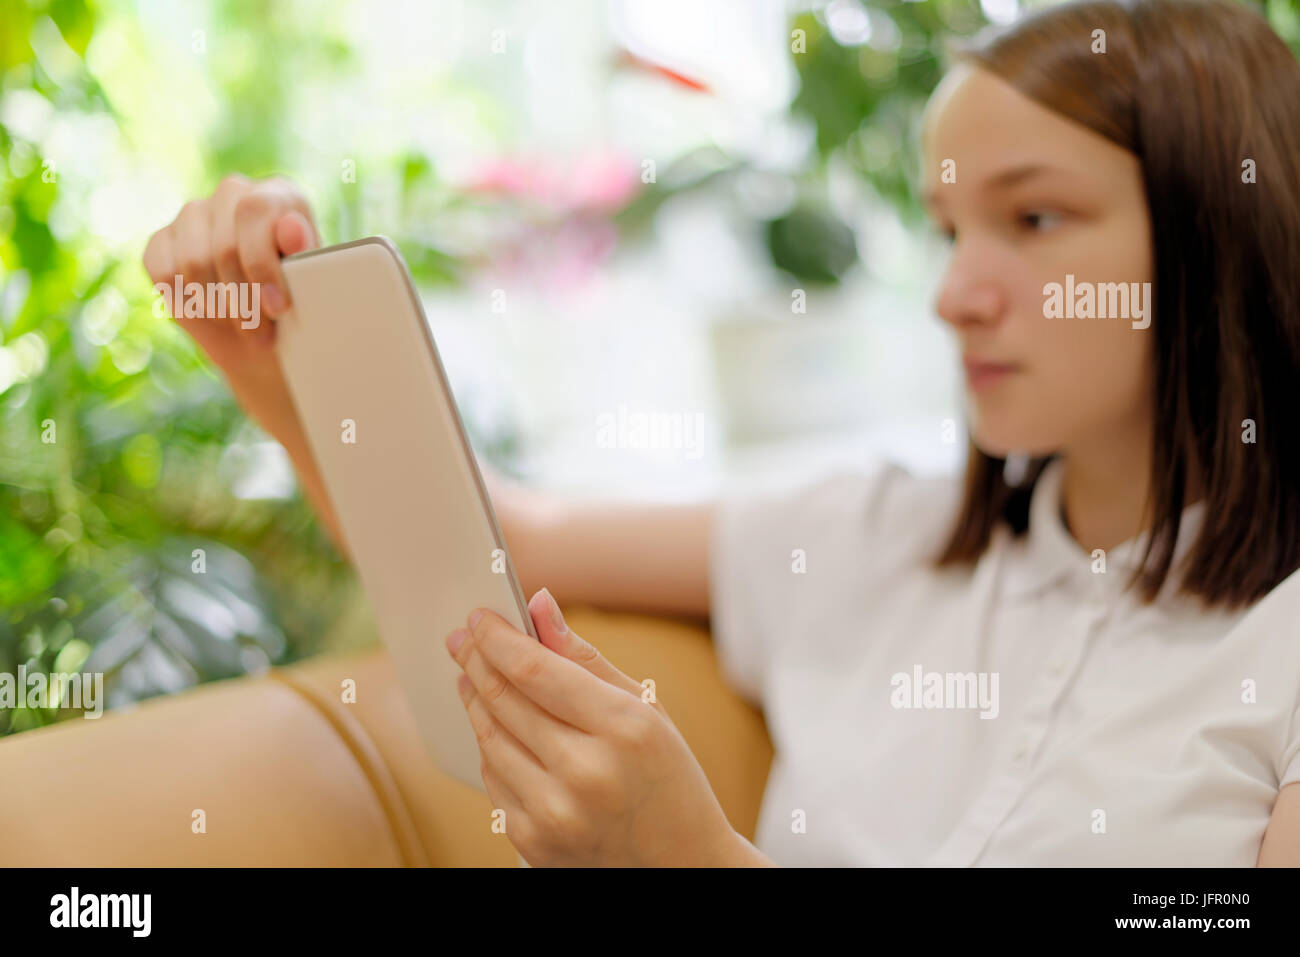 People: young girl, student, making use of tablet computer or e-book reader, in a library or bookstore, selective focus on hands Stock Photo